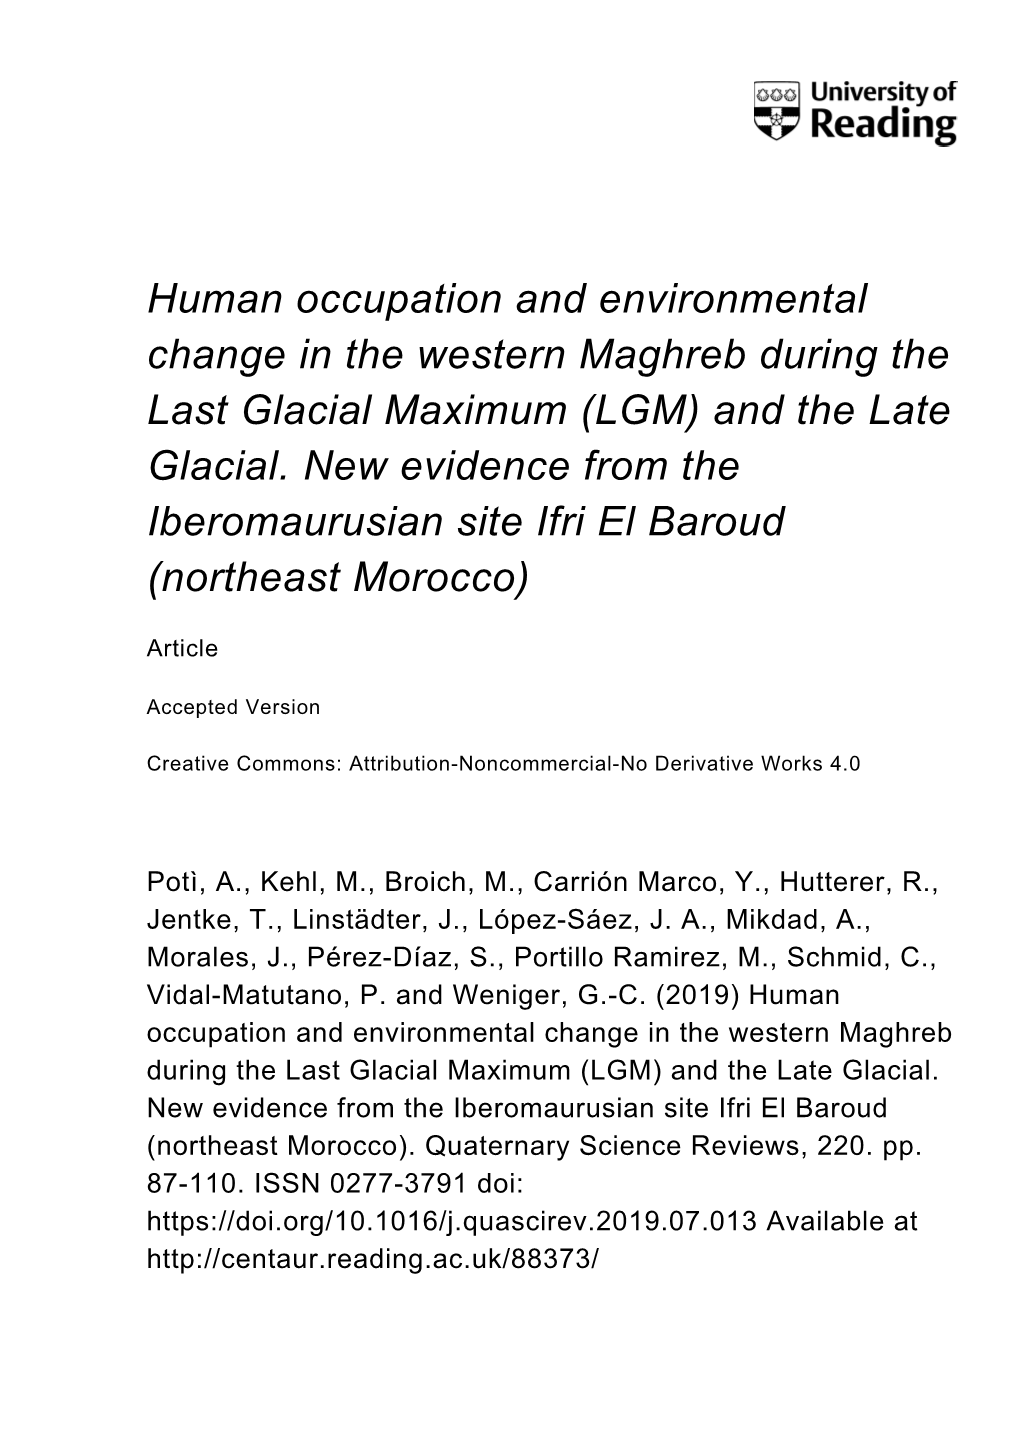 Human Occupation and Environmental Change in the Western Maghreb During the Last Glacial Maximum (LGM) and the Late Glacial